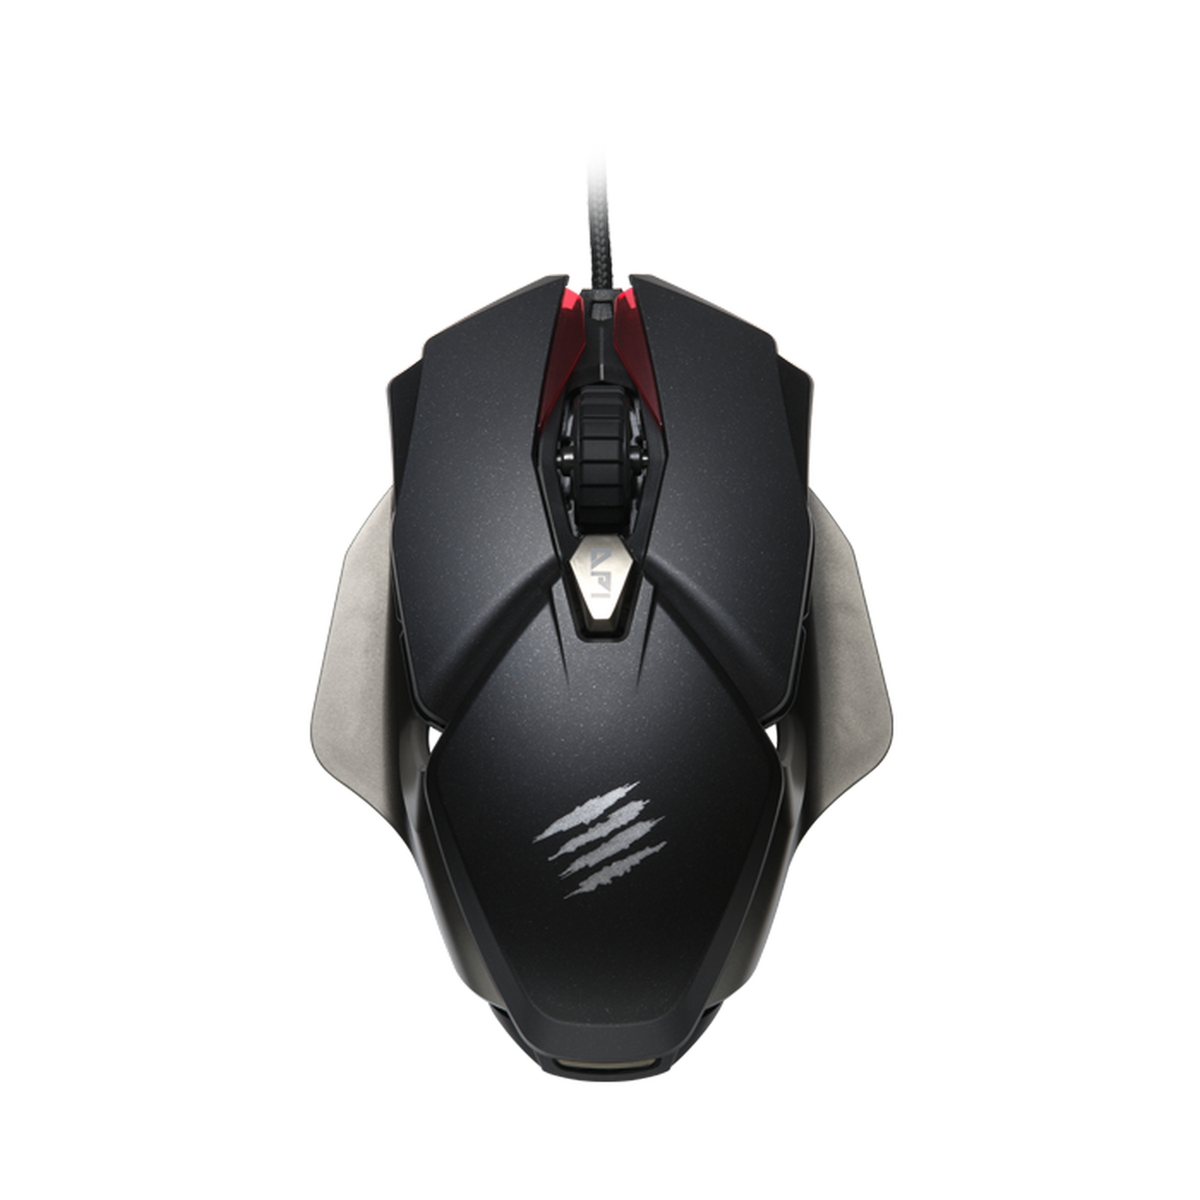 CATZ Schwarz Gaming Mouse, Black MAD B.A.T. Mouse, Gaming Performance Ambidextreous 6+